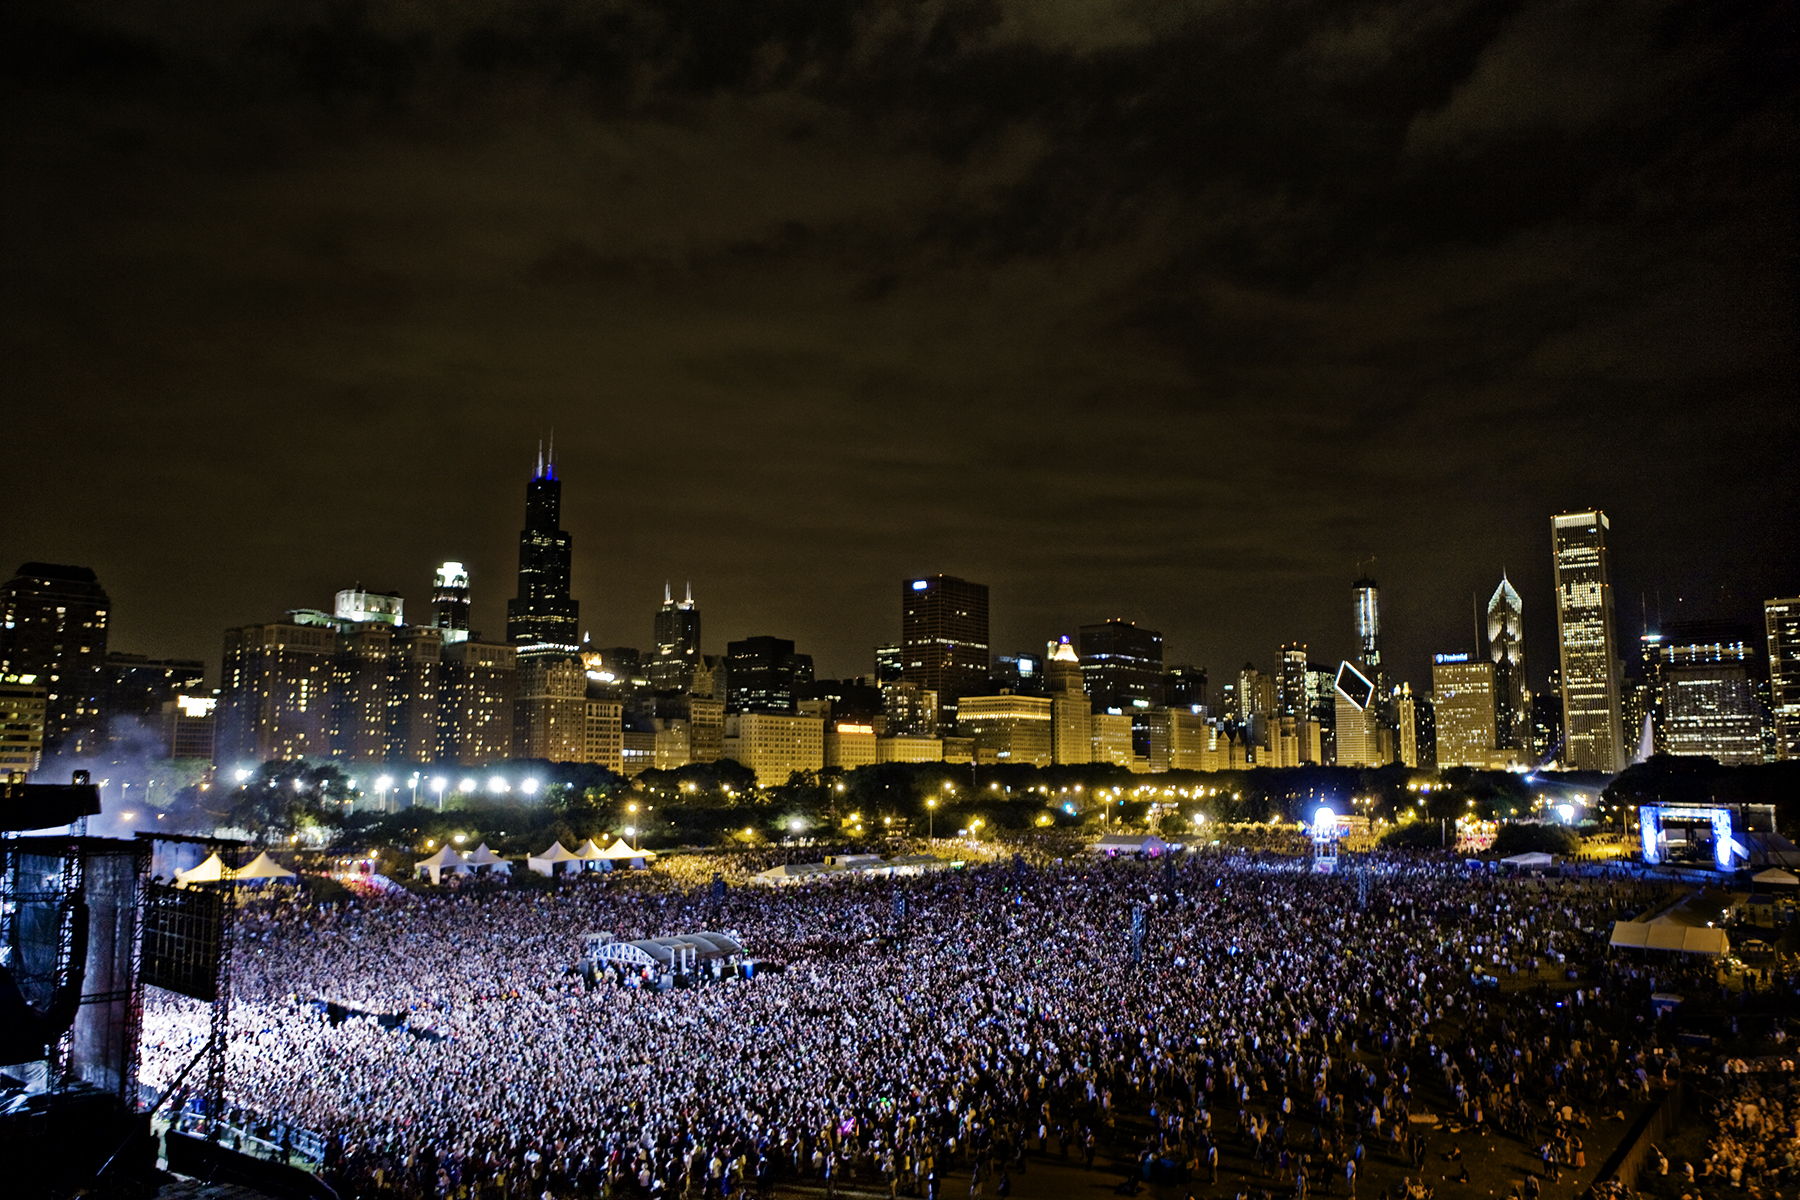 [FESTIVAL NEWS] Lollapalooza Celebrates 25-Year Anniversary With 4 Days & Colorful Lineup